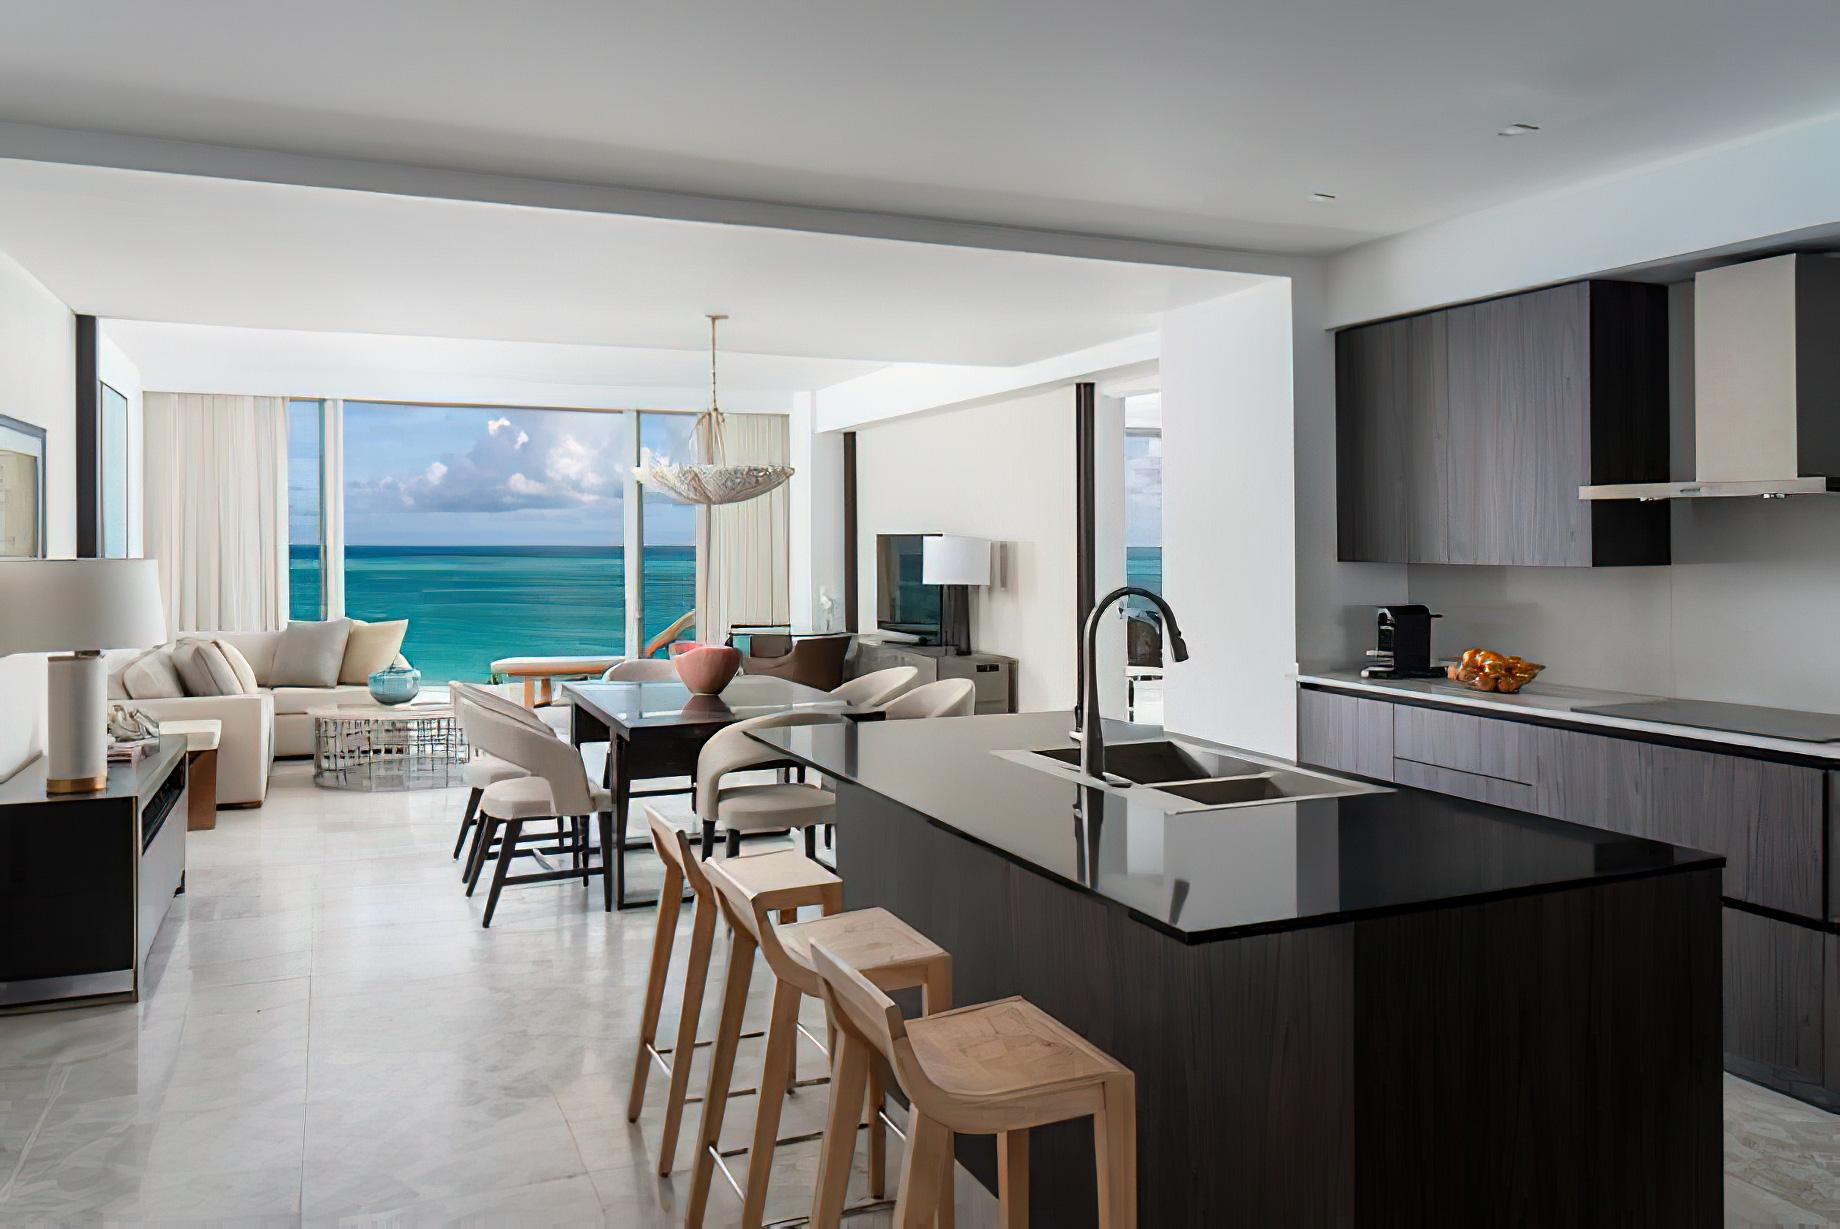 The Ritz-Carlton, Turks & Caicos Resort - Providenciales, Turks and Caicos Islands - Residence Kitchen